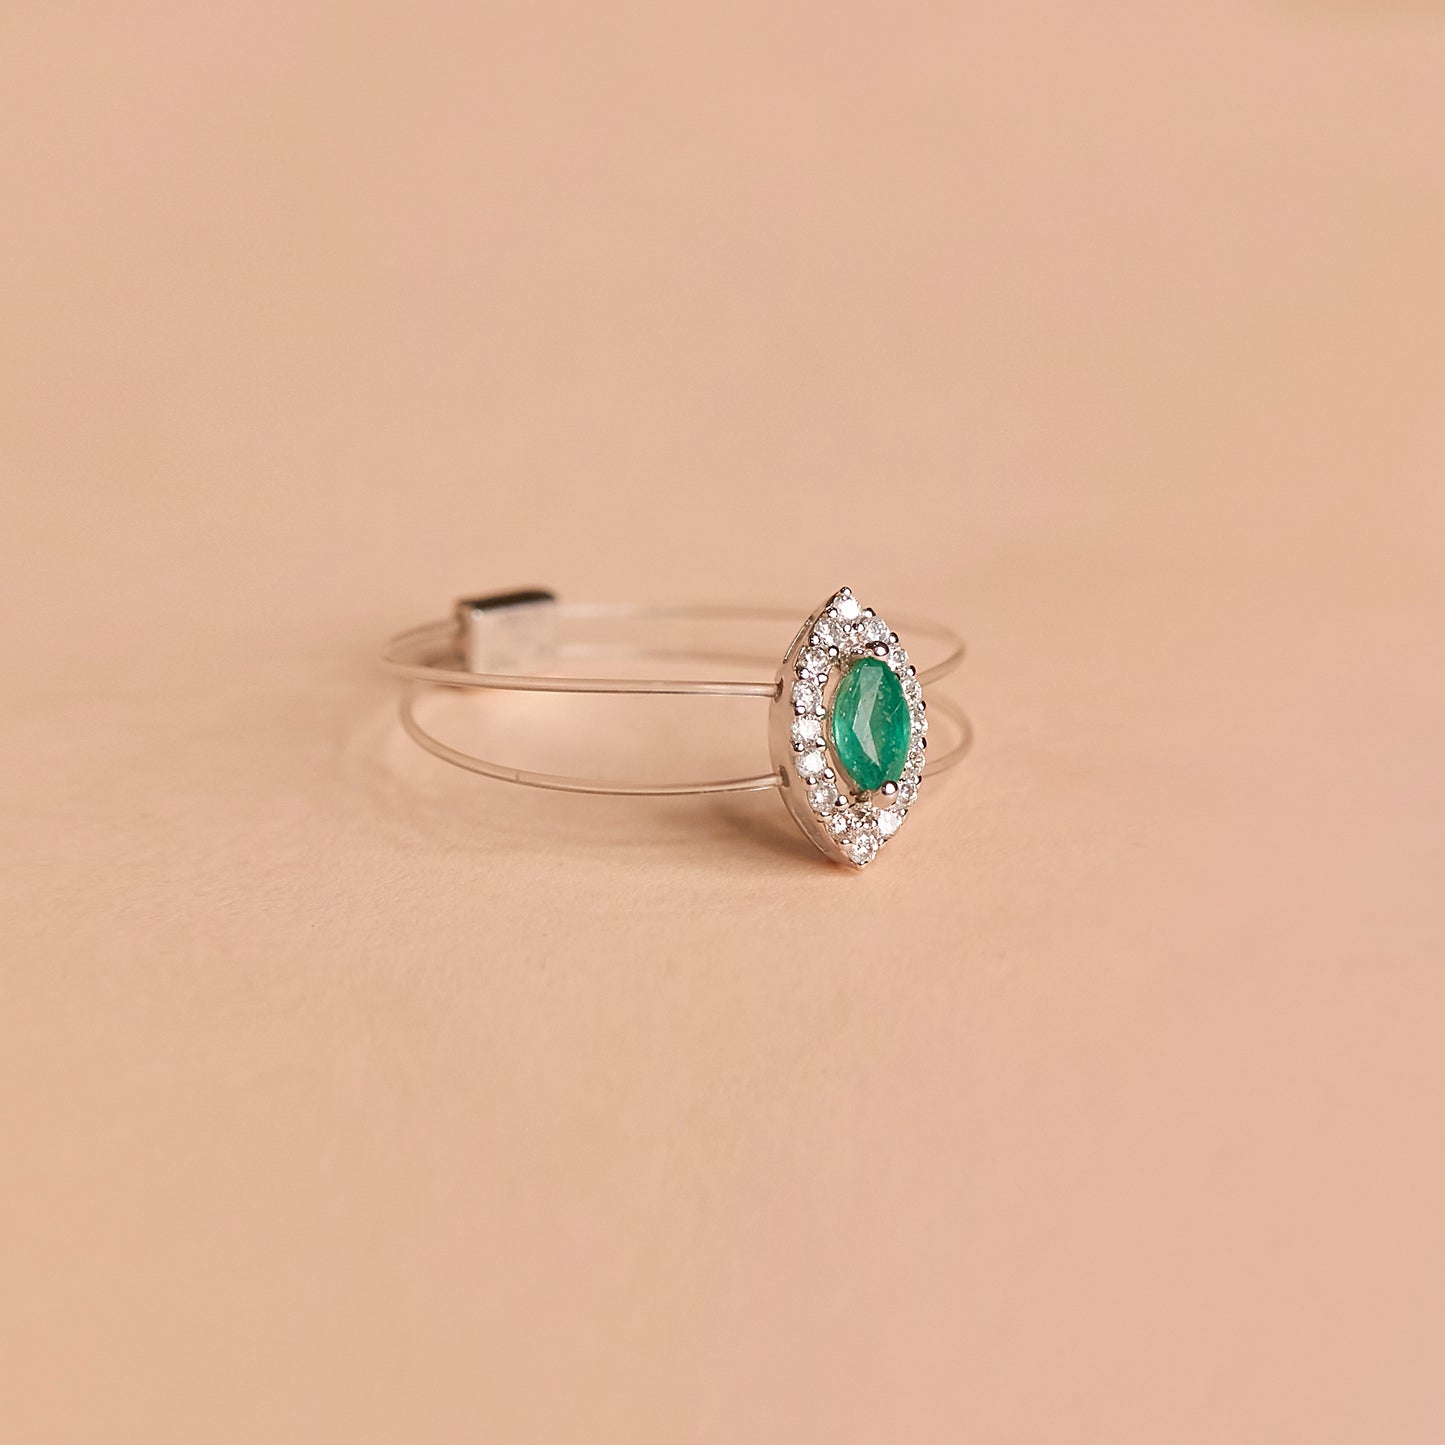 SPARKLE OVAL CUT EMERALD RING